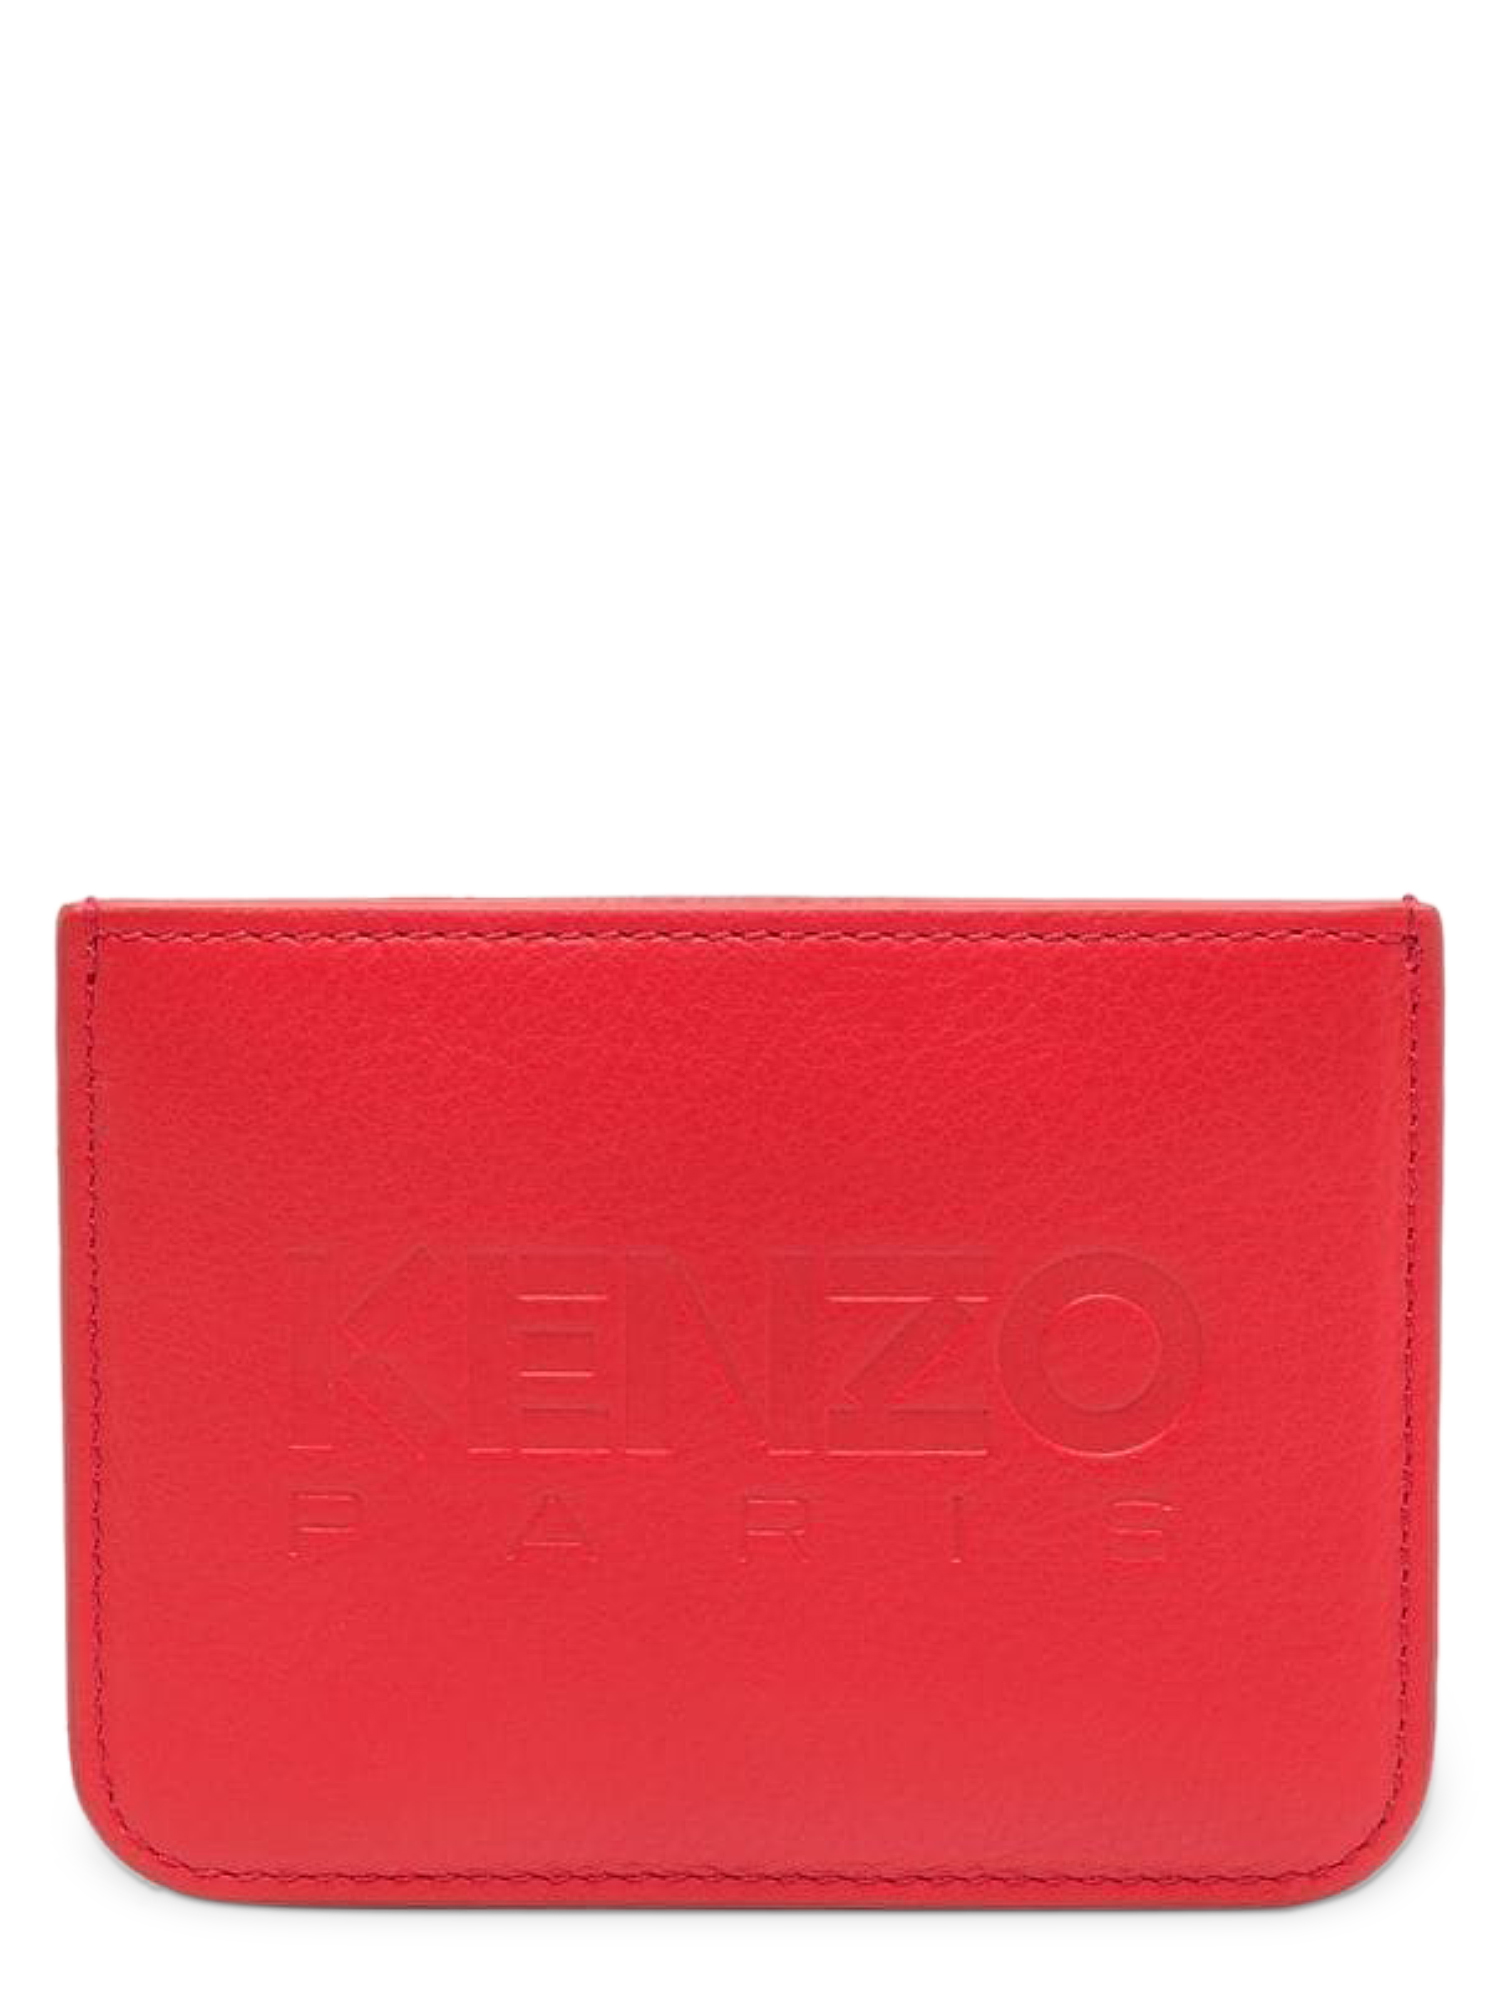 Portefeuilles Pour Femme - Kenzo - En Leather Red - Taille:  -